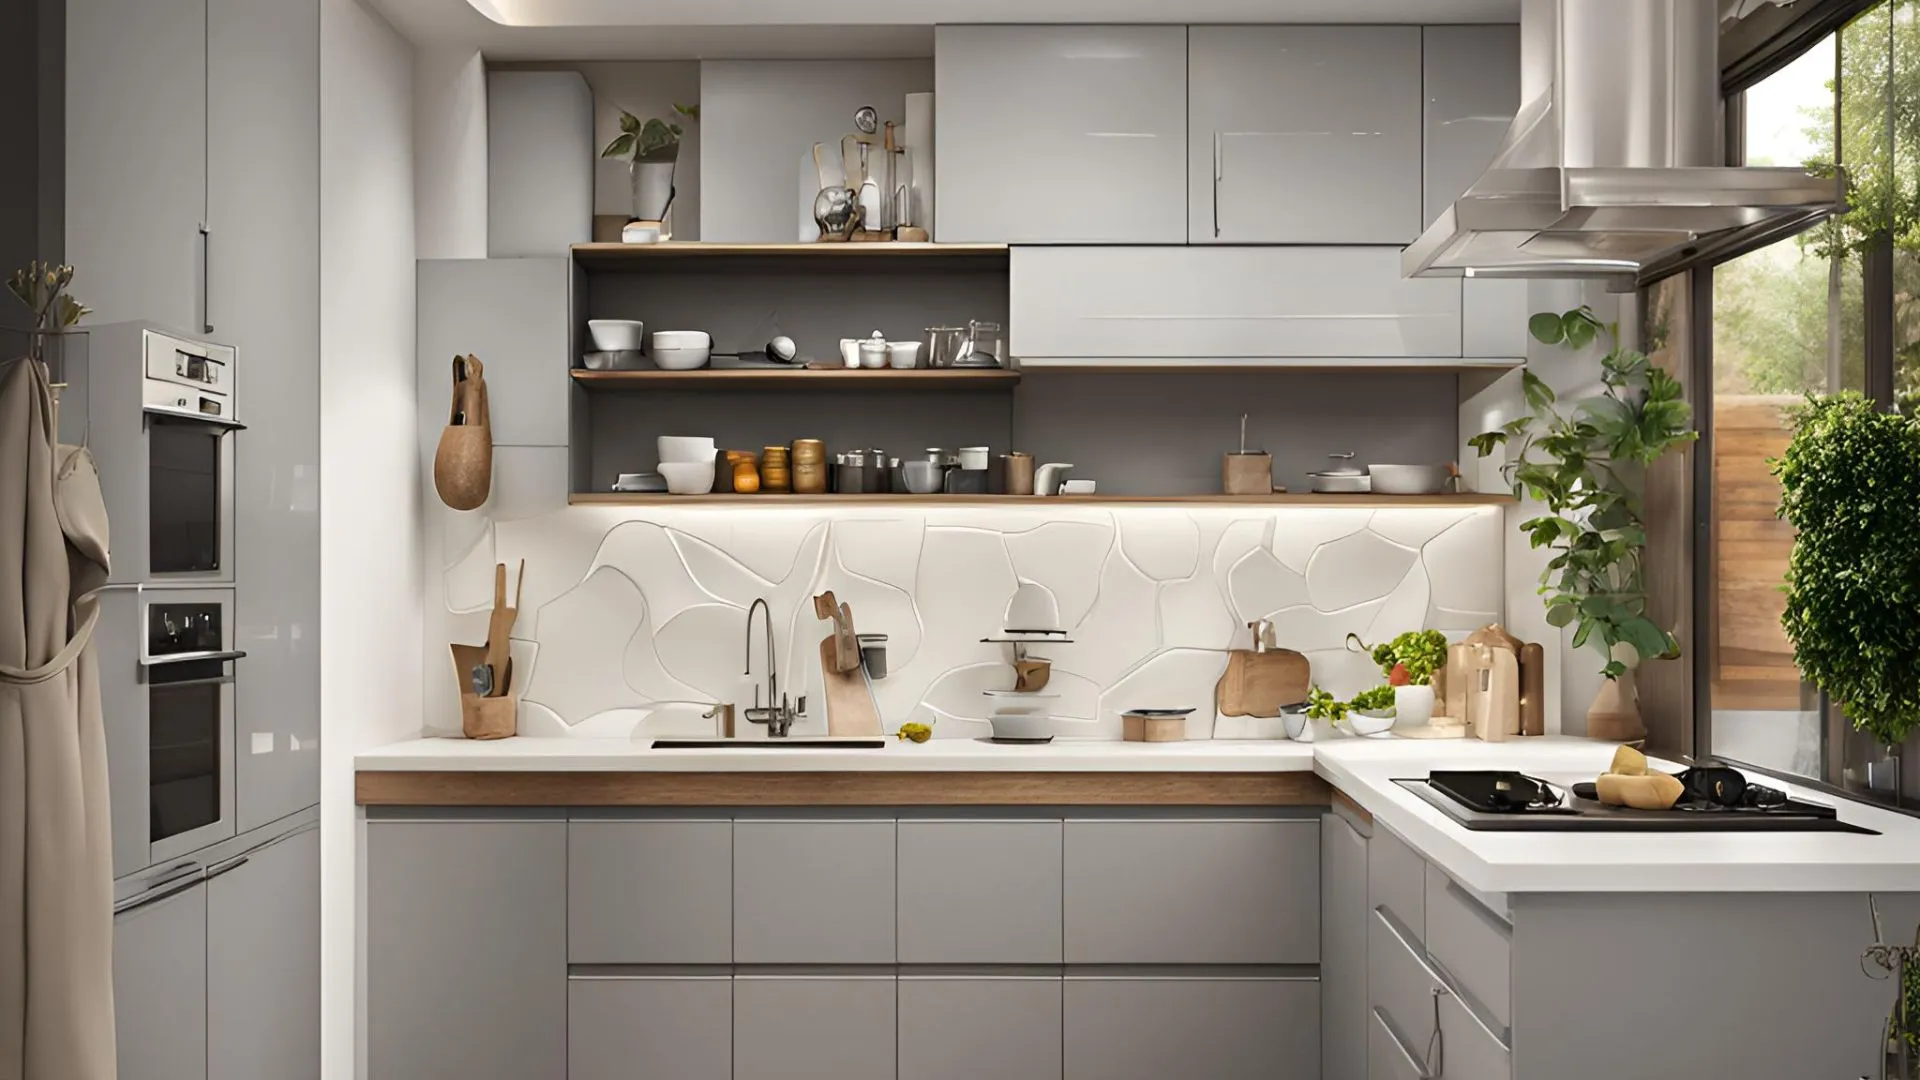 Must-Know Things Before Designing a Modular Kitchen